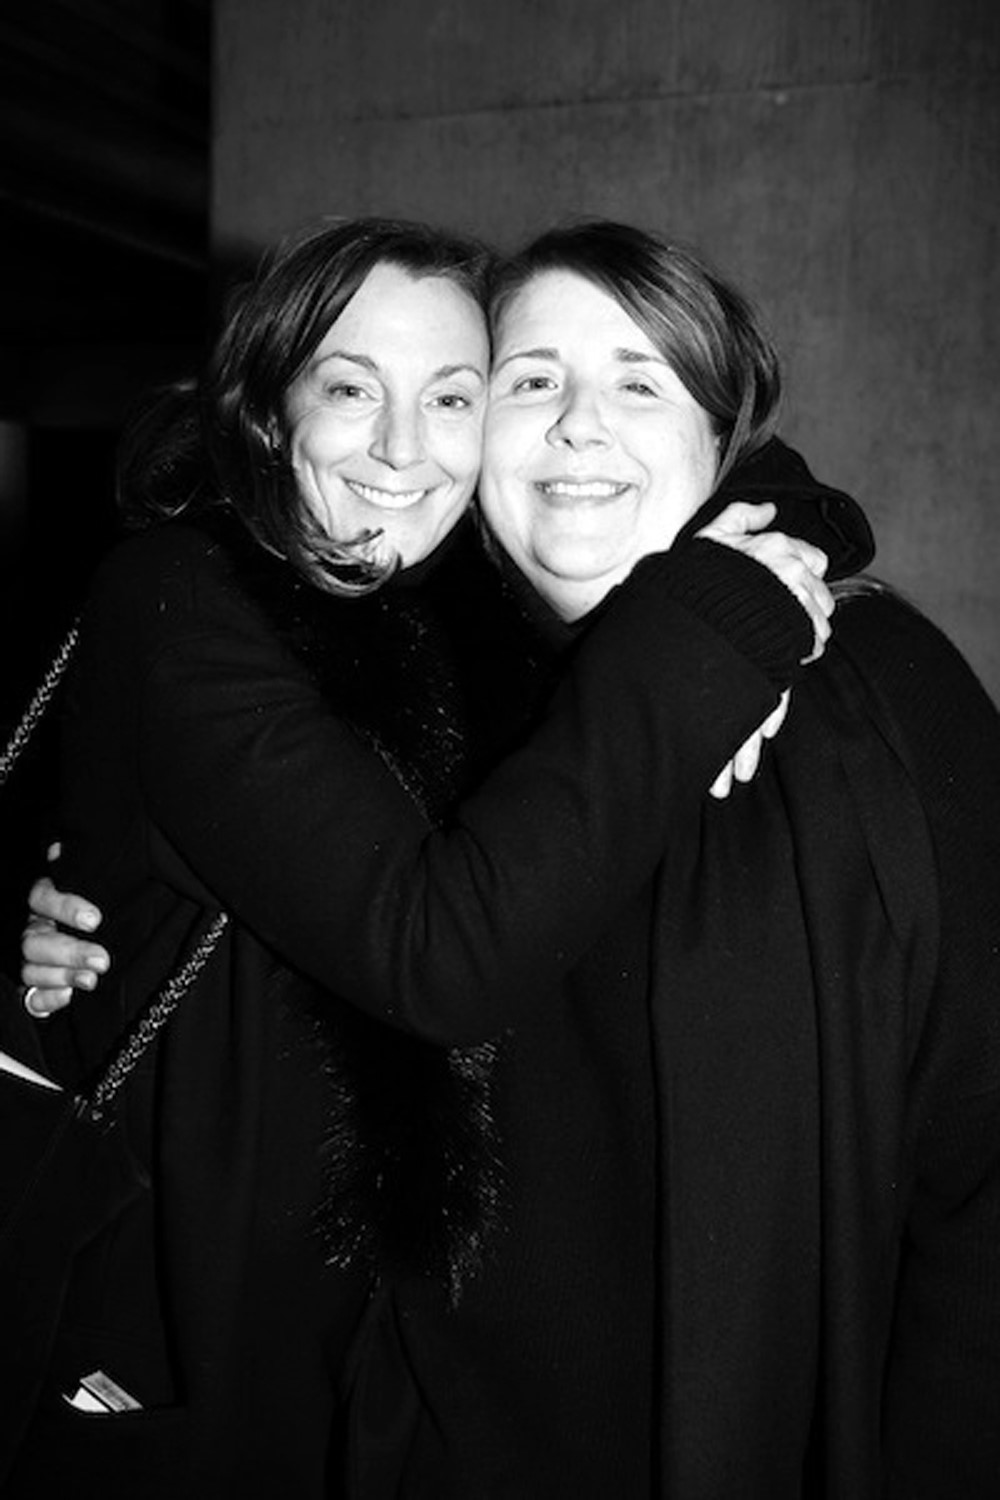 Wilson with the designer Phoebe Philo, a former student